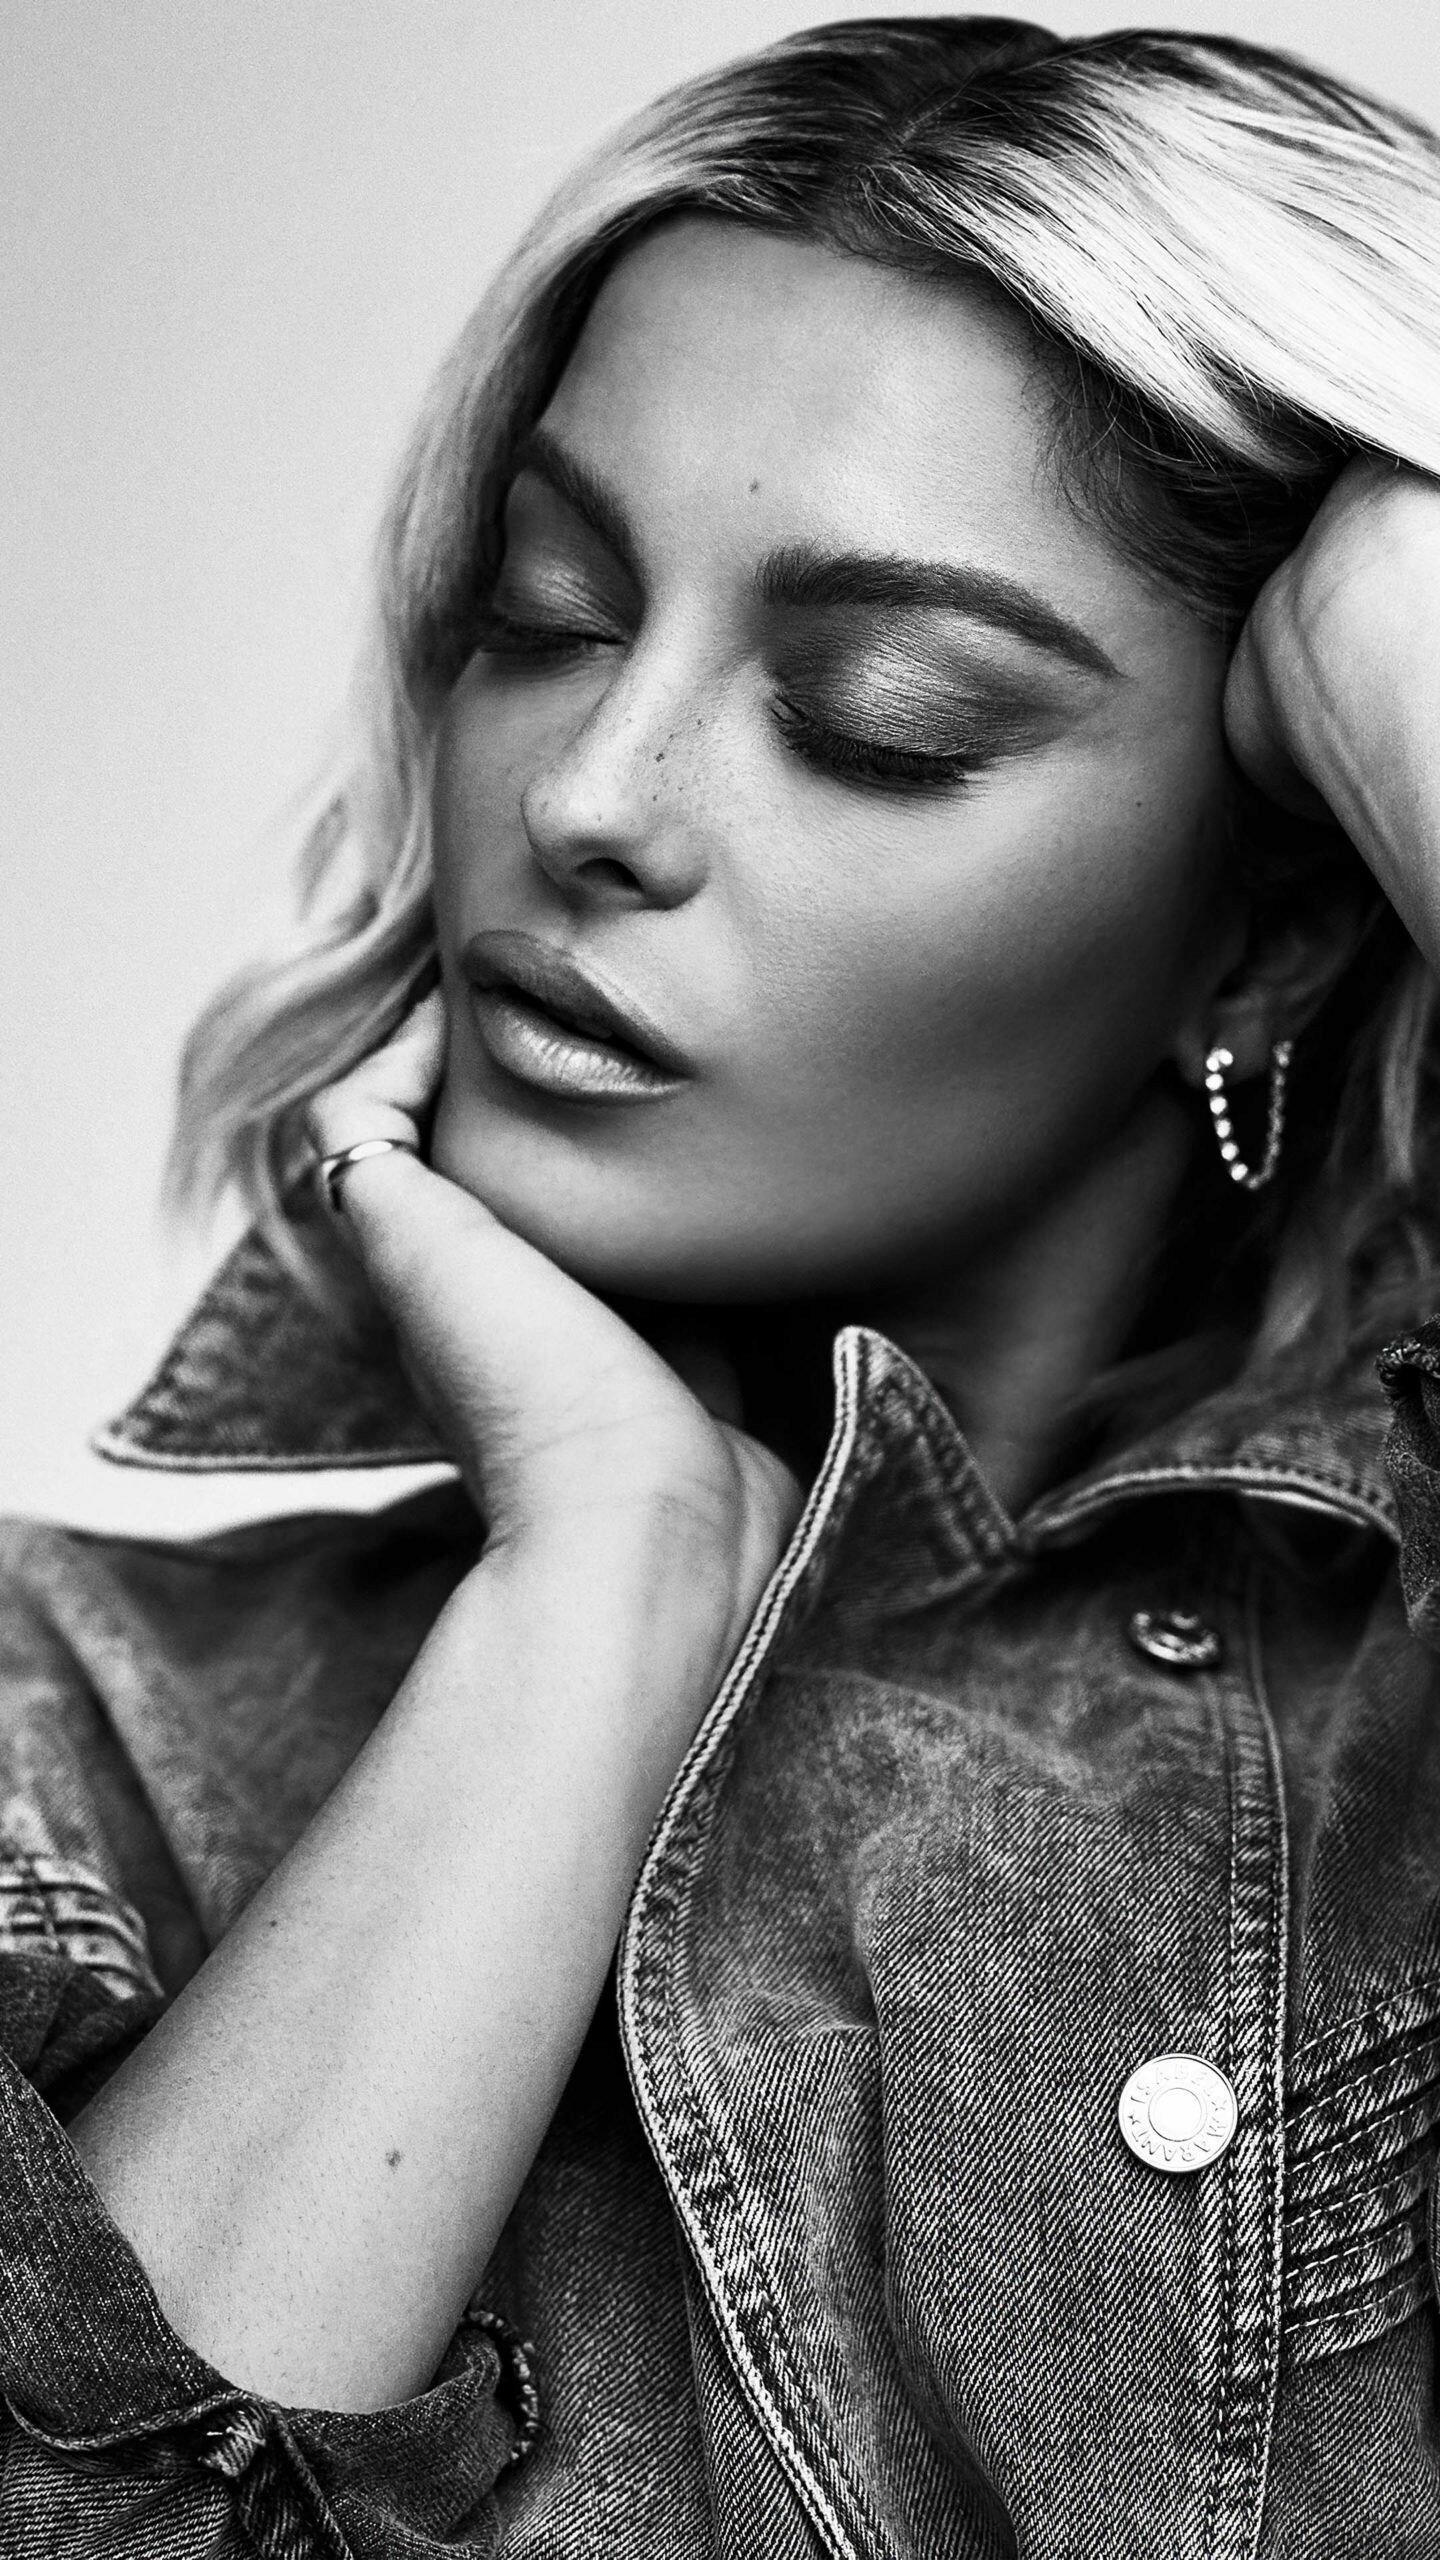 Bebe Rexha: Monochrome, "Sacrifice" was released as the second single from Better Mistakes on March 5, 2021. 1440x2560 HD Wallpaper.